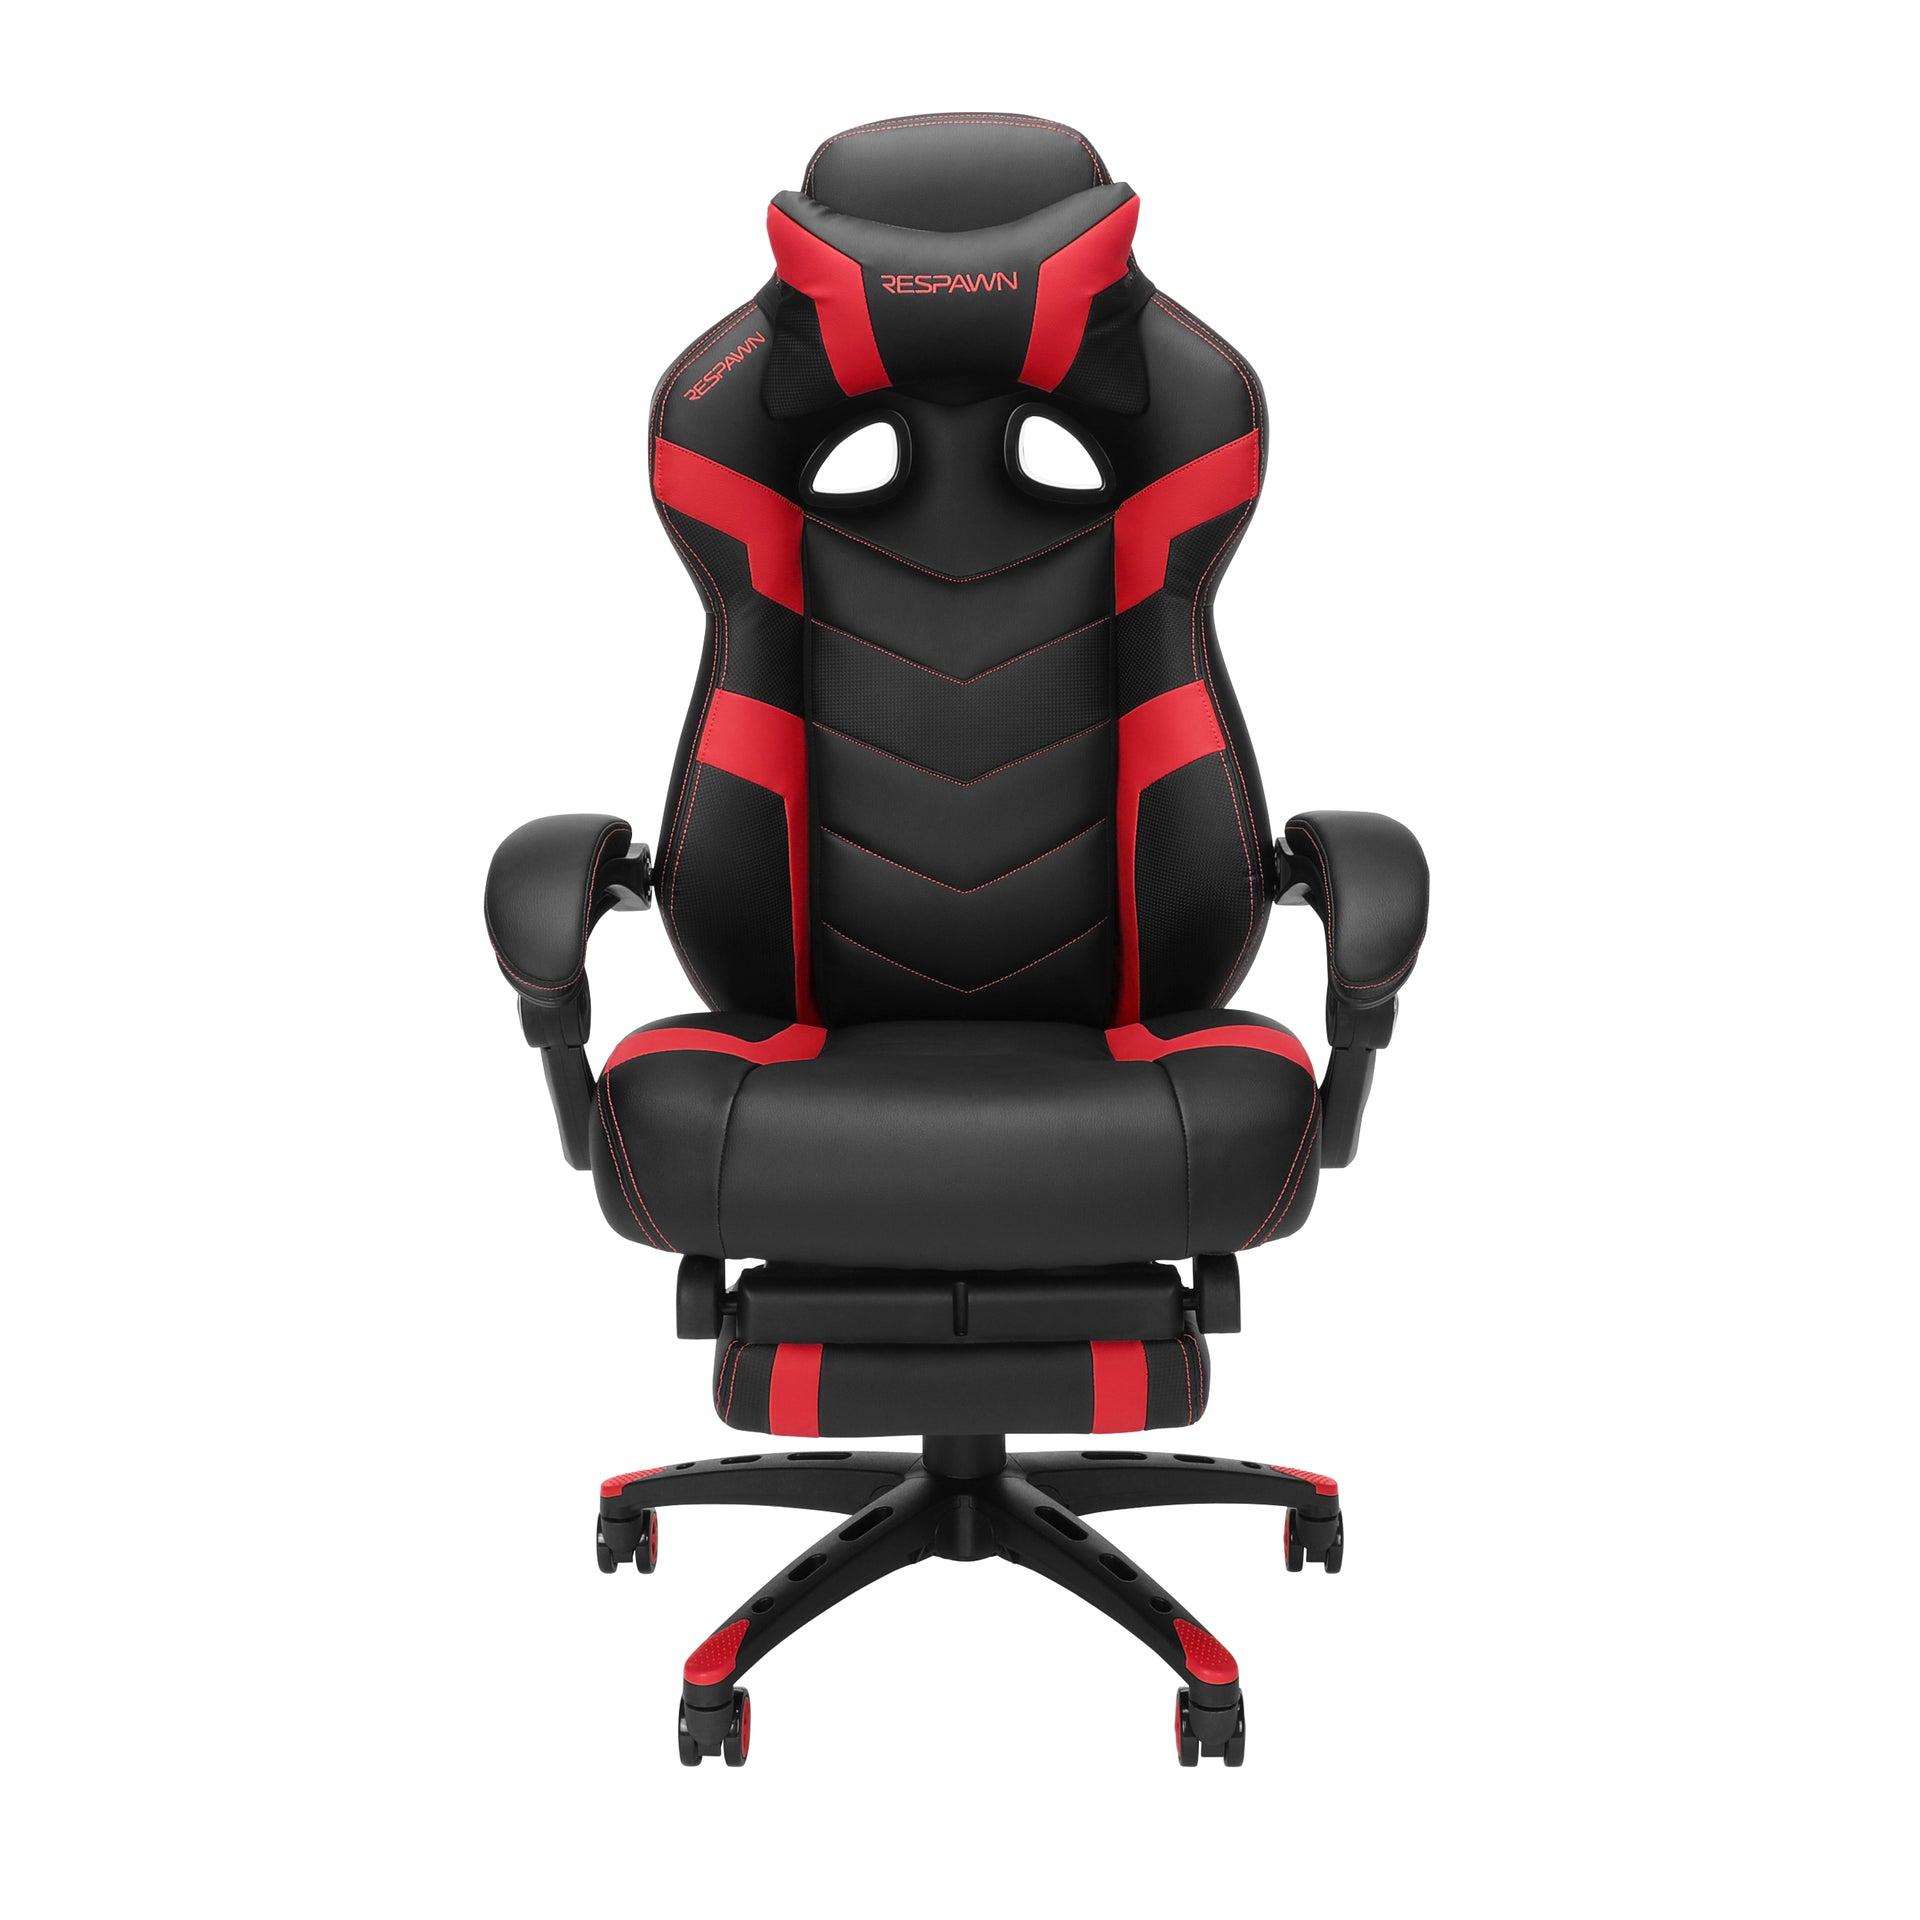 RESPAWN 110 Pro Racing Style Gaming Chair